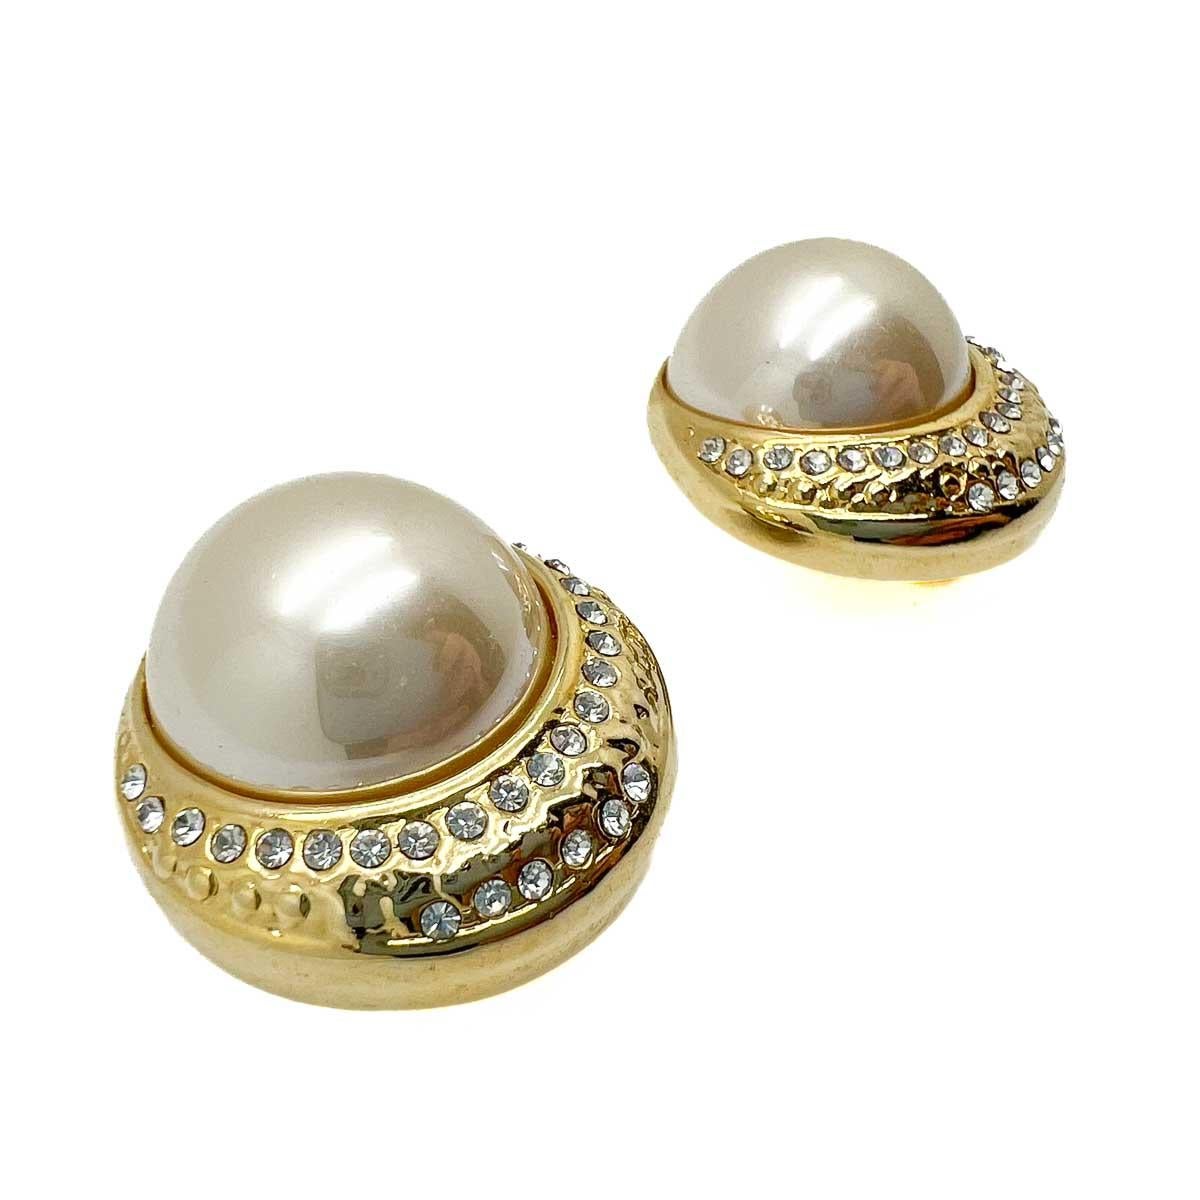 A pair of Vintage Grand Pearl Crescent Earrings. A stunning statement earring combining lustrous gold and a huge half pearl, finished to perfection with chaton crystal detailing. Gold and pearl; a style winner and jewel box necessity.


An unsigned